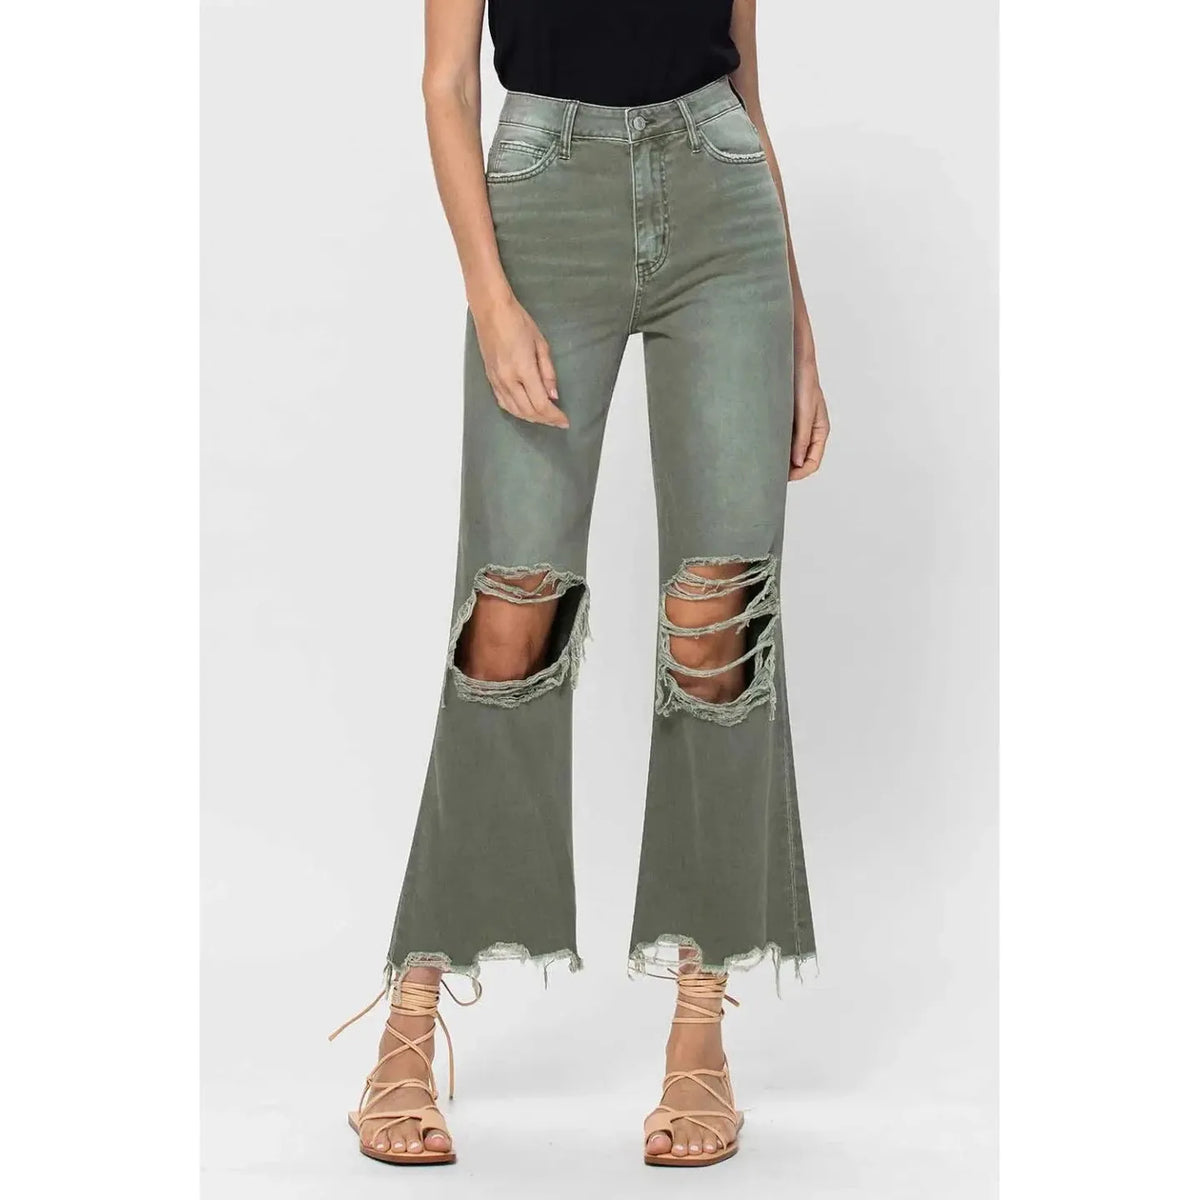 Multicolored distressed denim 90's flare jeans - Women's Clothing 